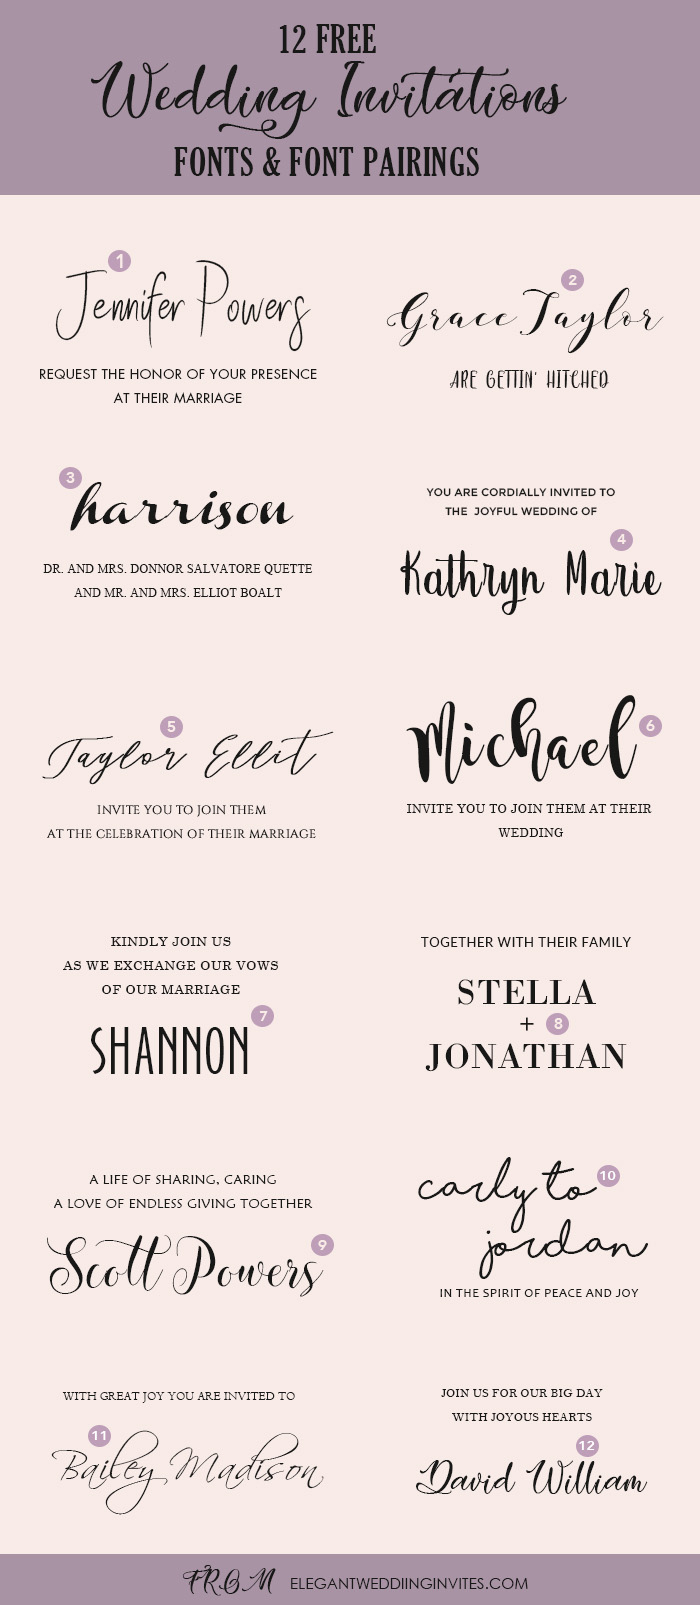 Font For Wedding Invitations Wedding Invitation Font Pairing Guide With Free Killer Fonts To